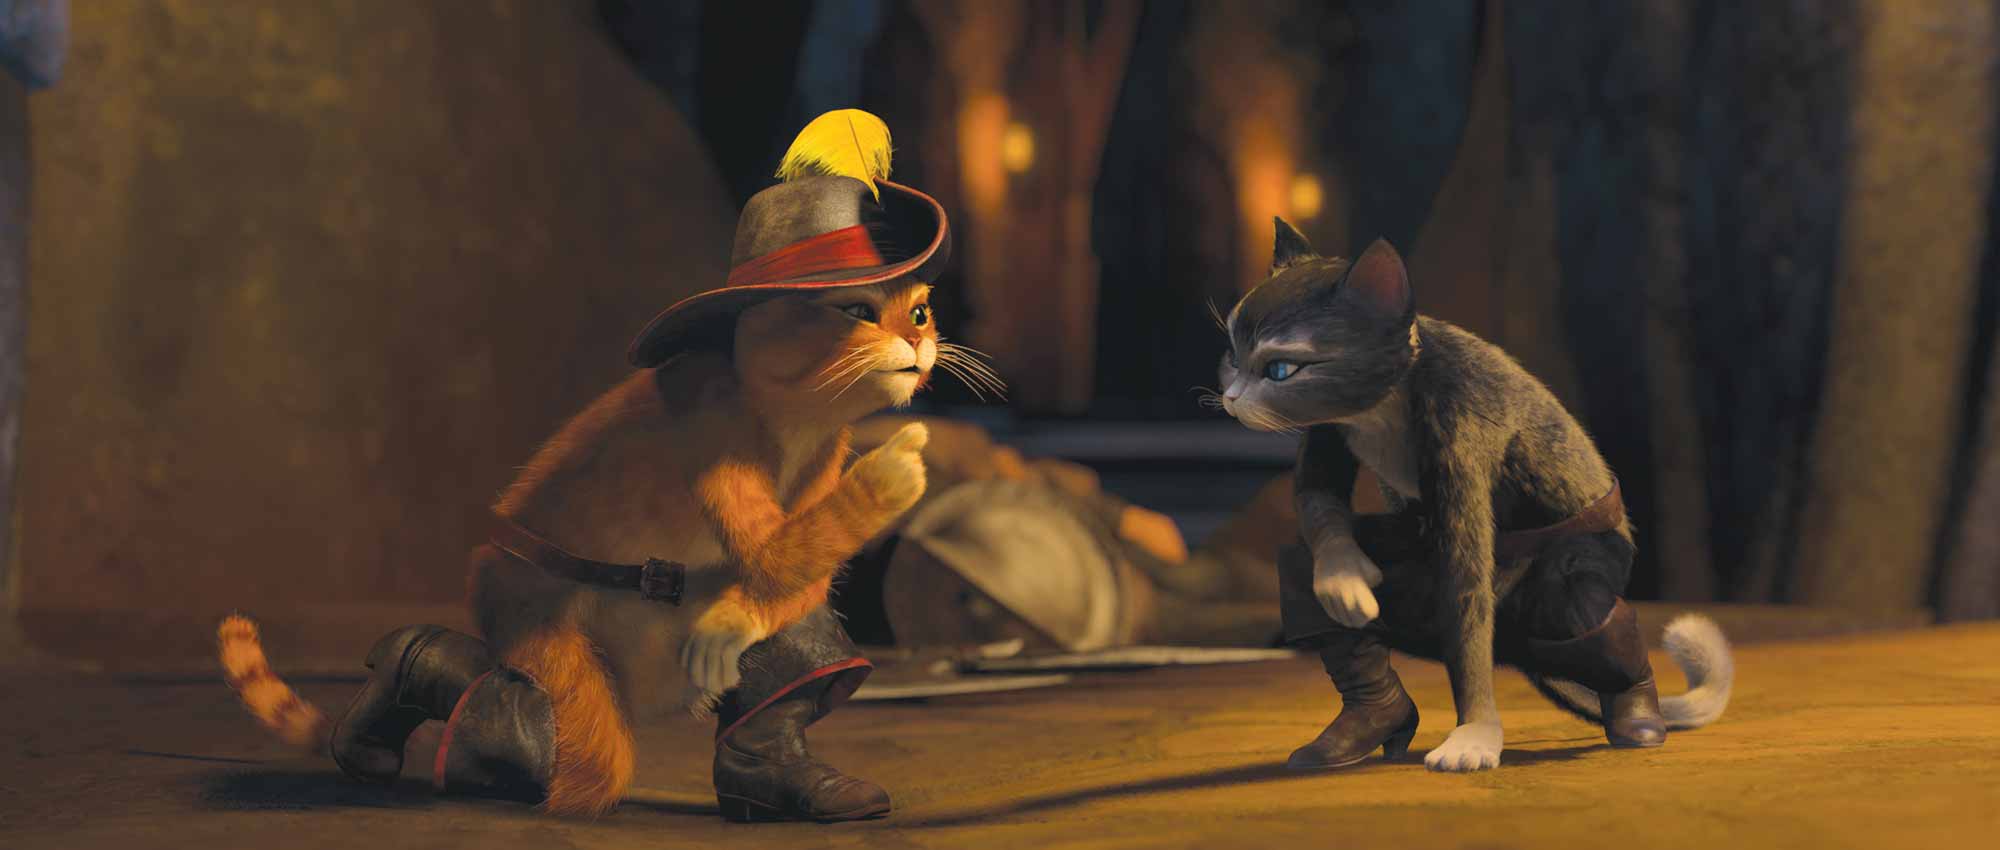  Puss In Boots (voiced by Antonio Banderas) and Kitty Softpaws (voiced by Salma Hayek) join forces in the film.